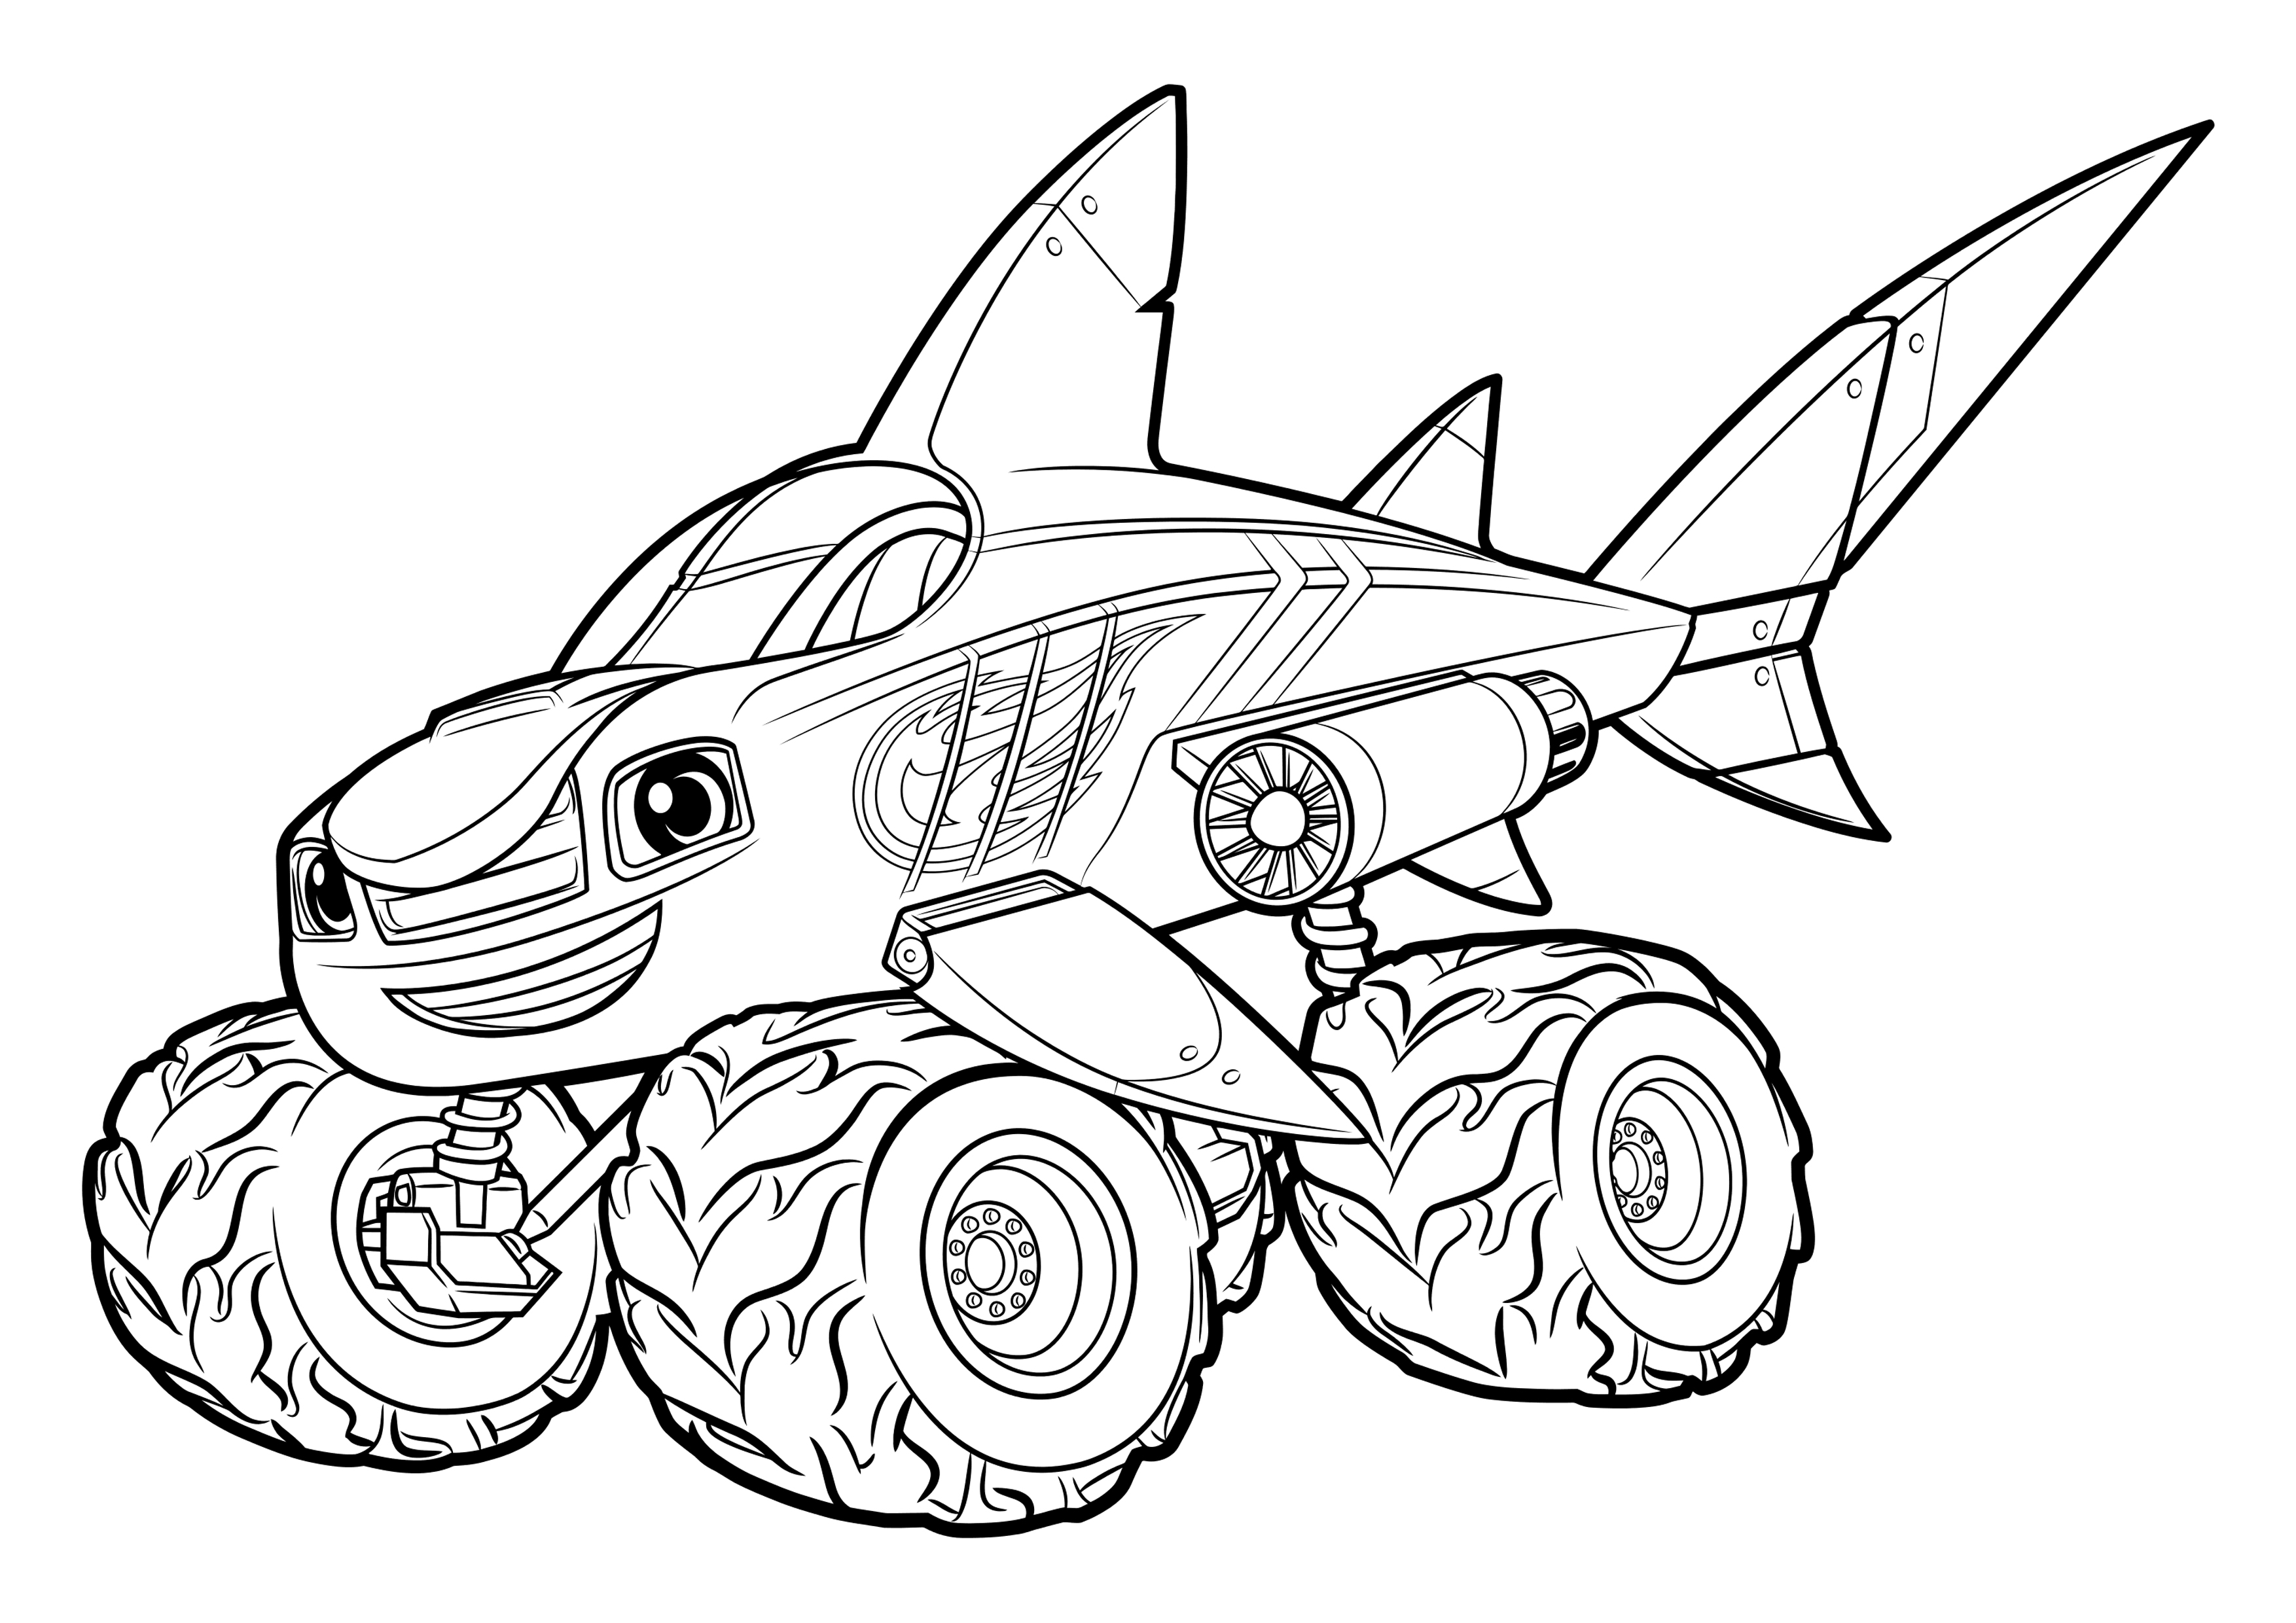 Blaze and the Monster Machines - Blaze - Shark - Coloring ...